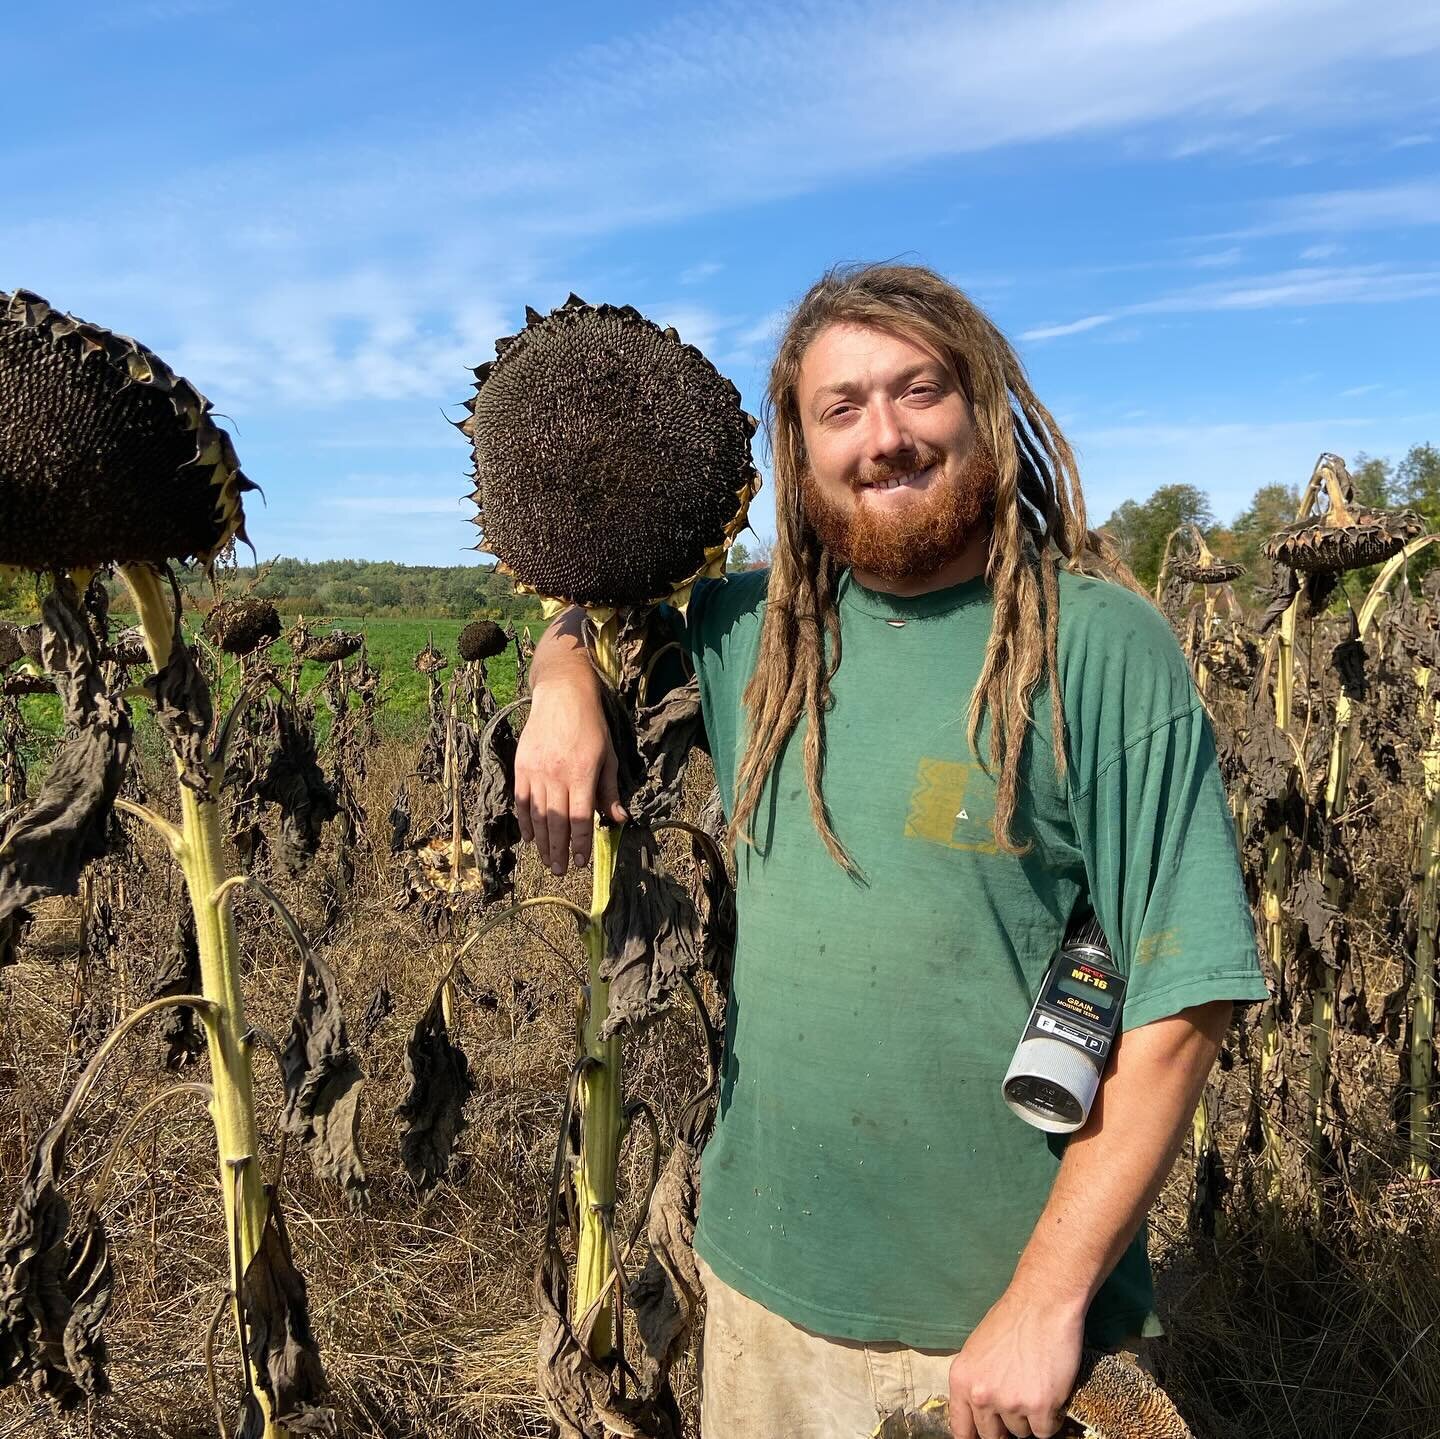 Meet your farmer! 

Our Founder and CEO, Greg, has over 12 years of organic farming experience and is always striving to learn. Greg was inspired to start Sunfox Farm after a trip to Europe, where he witnessed countless fields of sunflowers. Recogniz